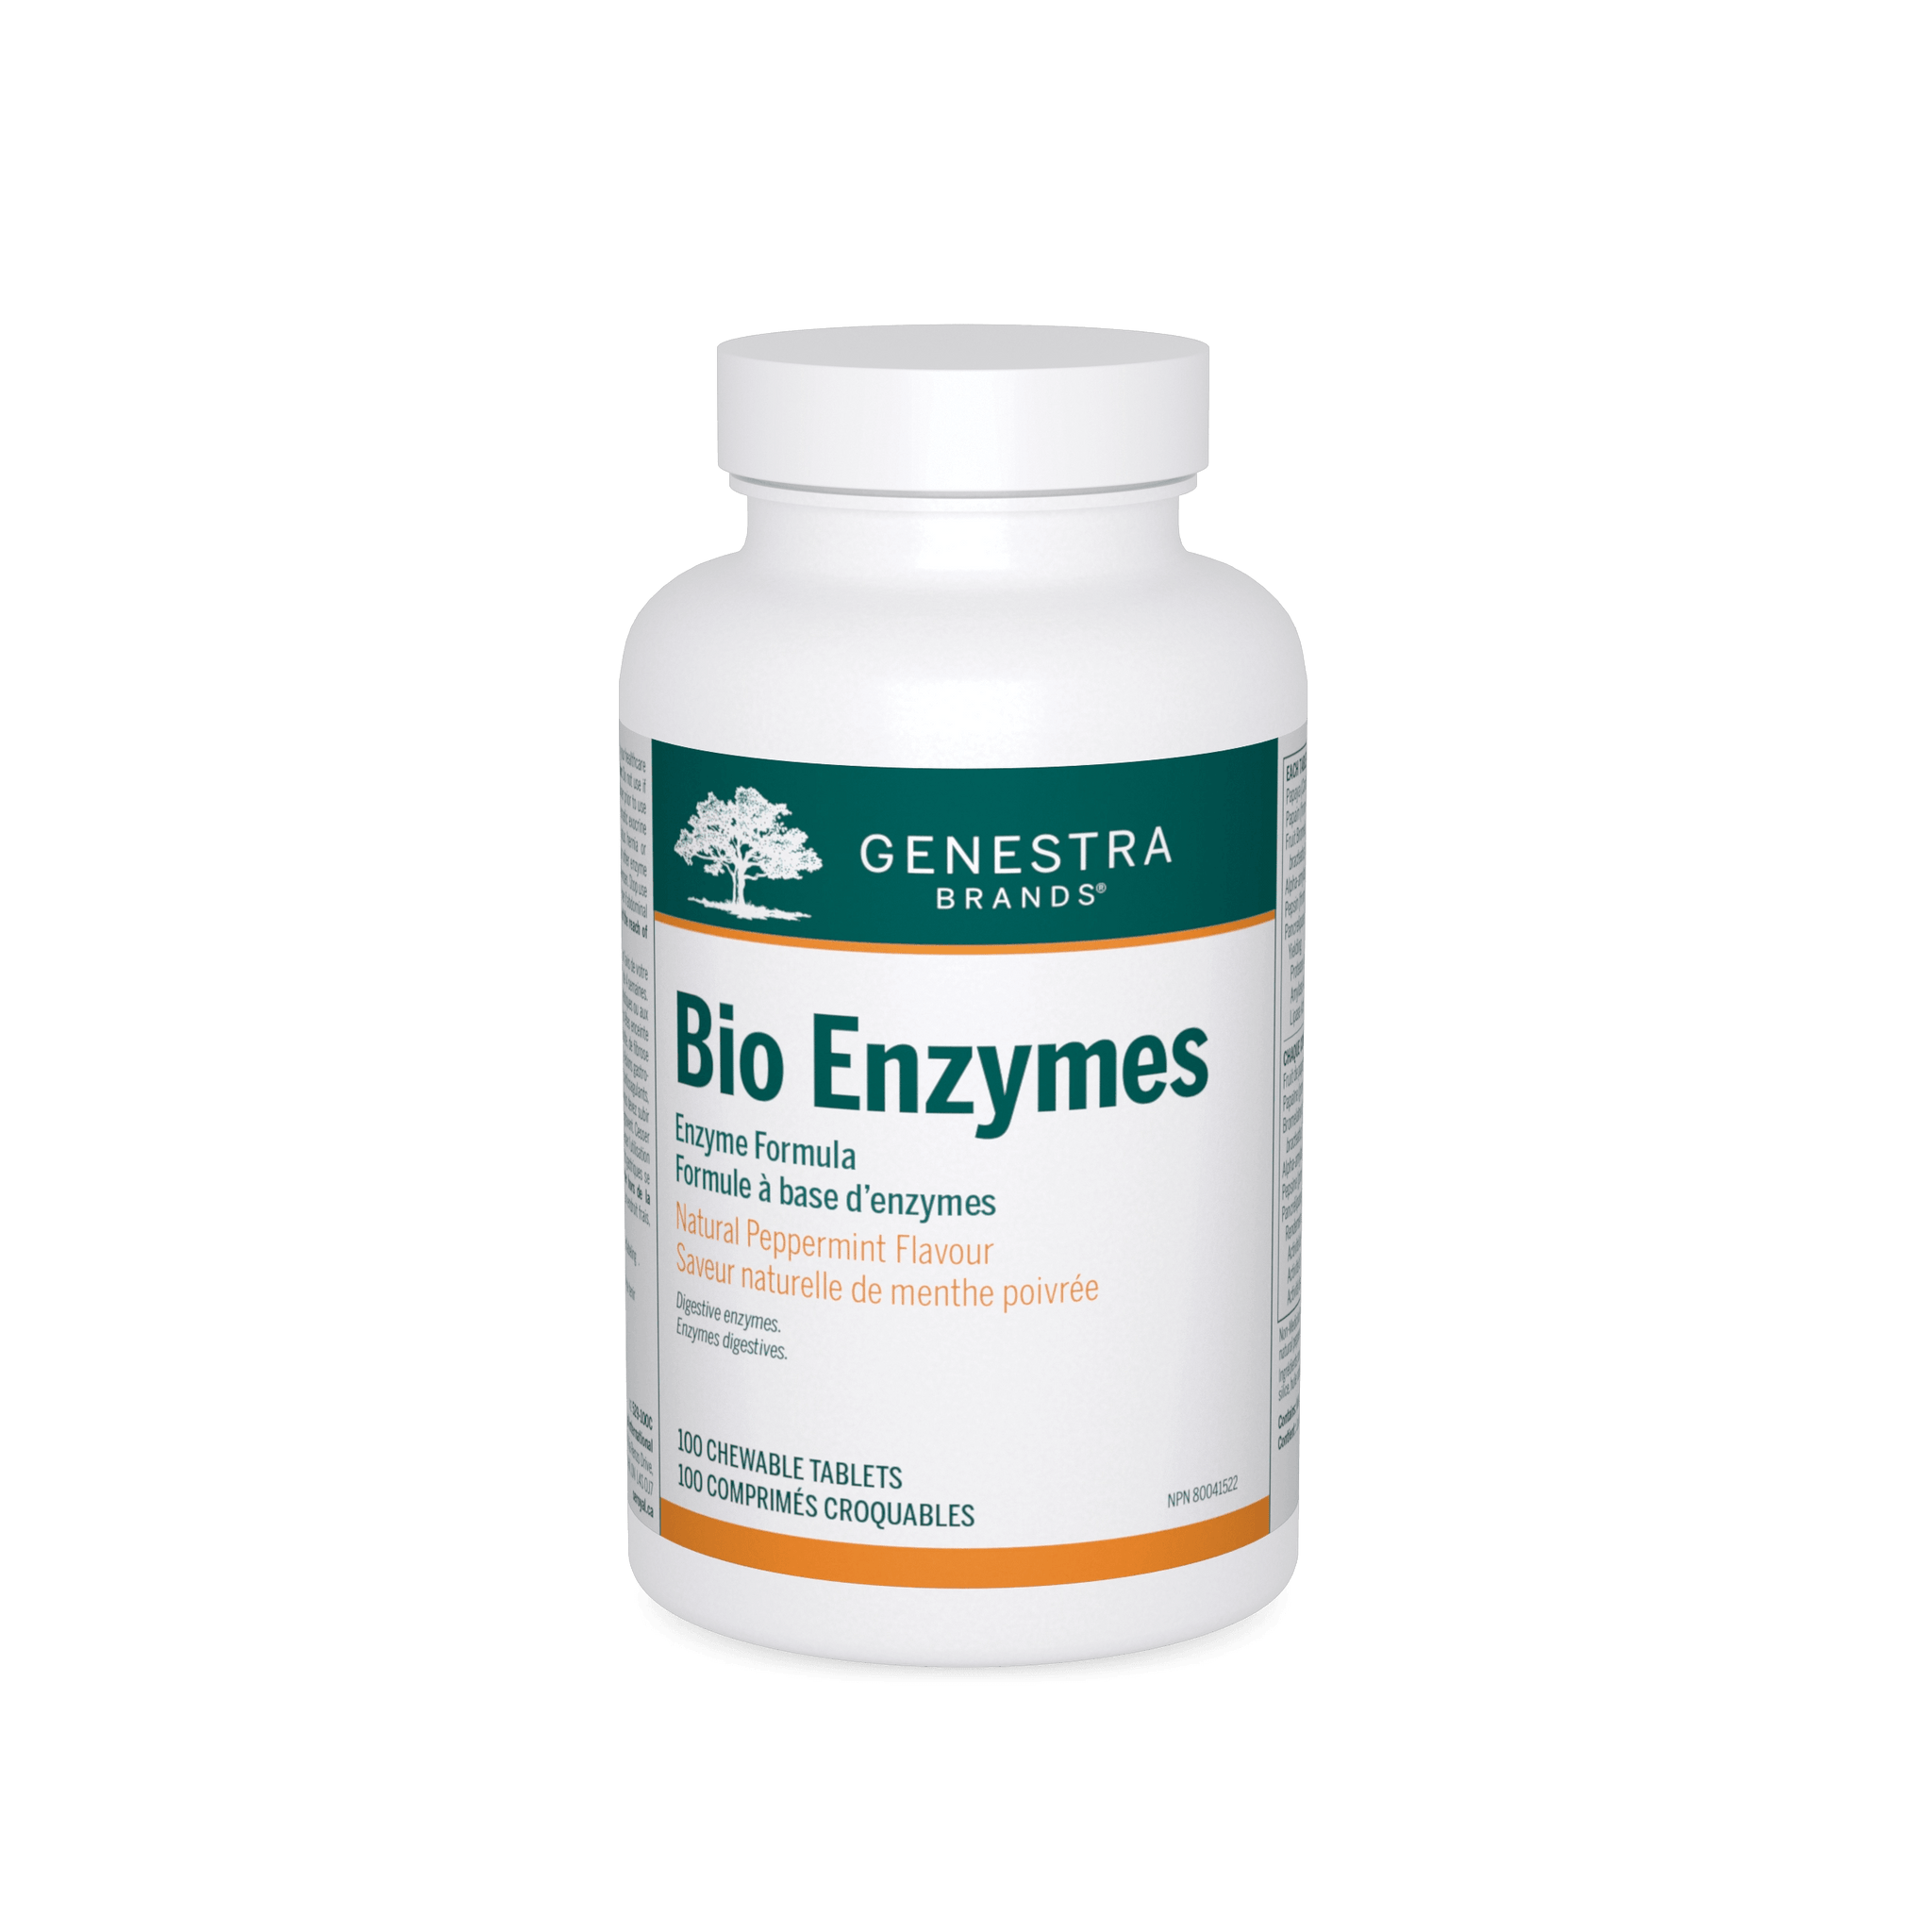 Genestra Brands Bio Enzymes 100 Chewable Tablets - Complete Digestive Enzyme Formula that Supports Optimal Digestion, Natural Peppermint Flavoured